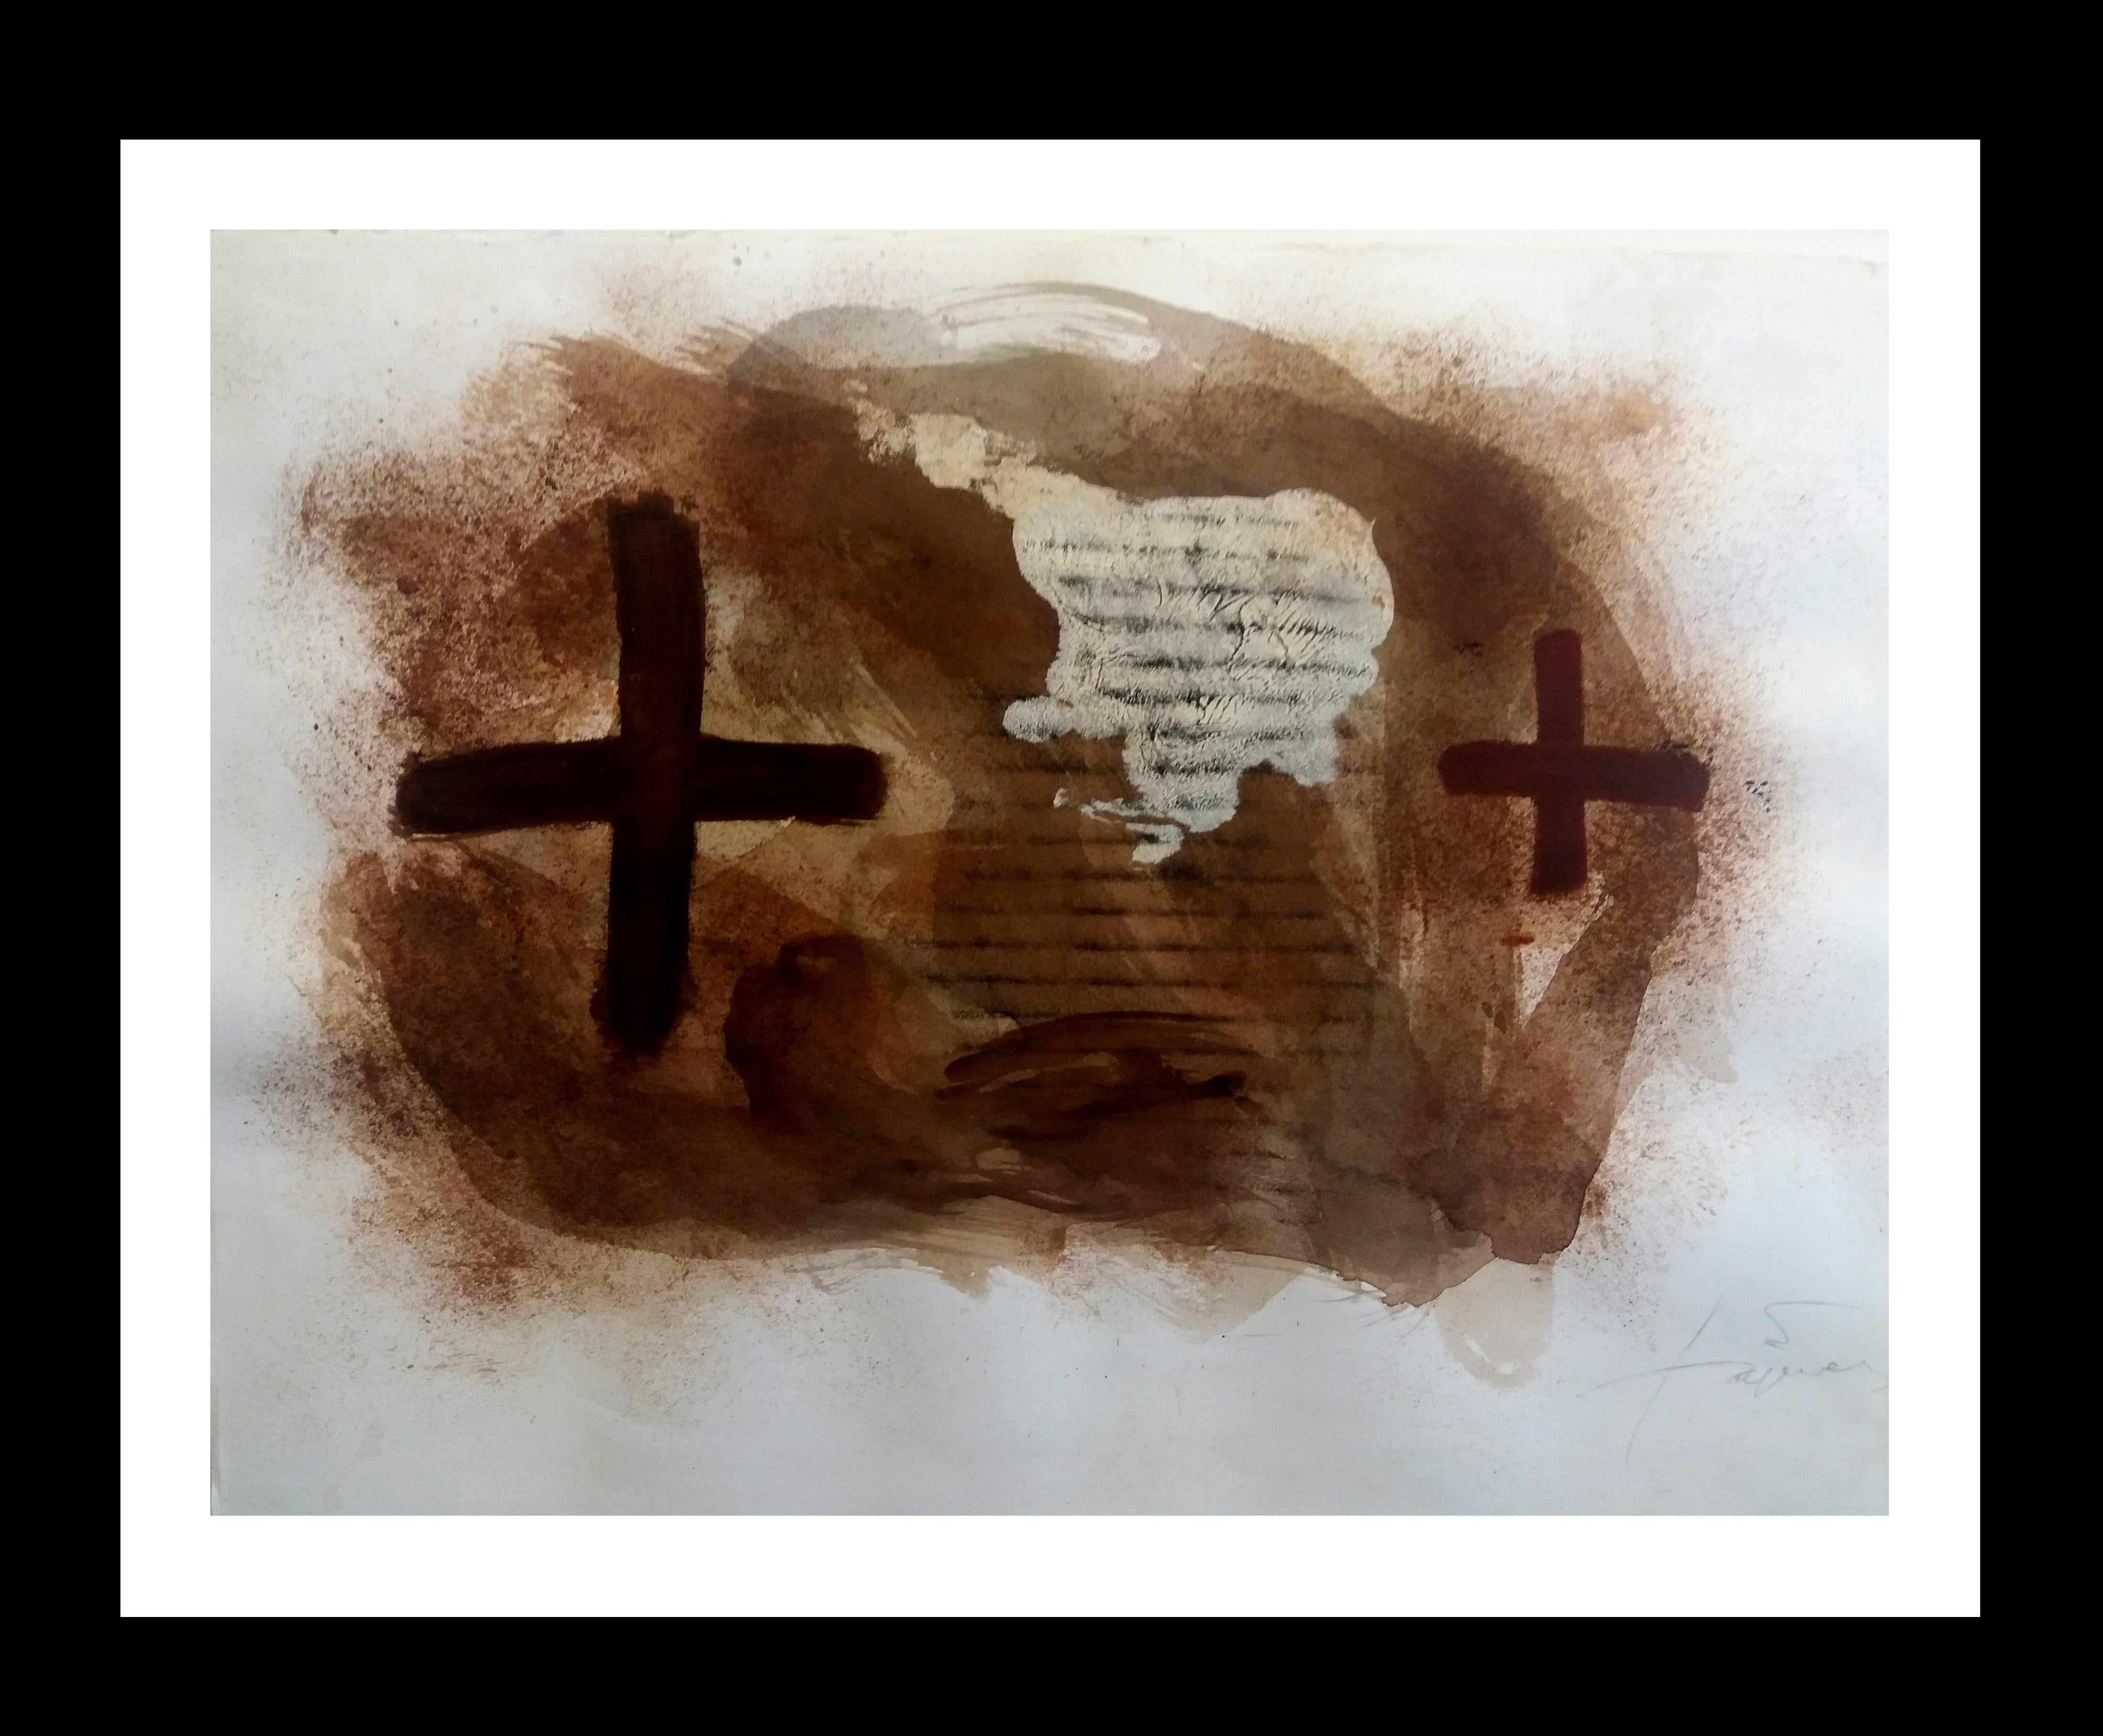 ACRYLIC PAINTING ON PAPER ORIGINAL.
Certificate Comisso Tapies

ANTONI TAPIES was the maximum representative of Spanish abstract art of the 20th century. His works are represented in museums and foundations around the world.
TÀPIES PUIG, Antoni